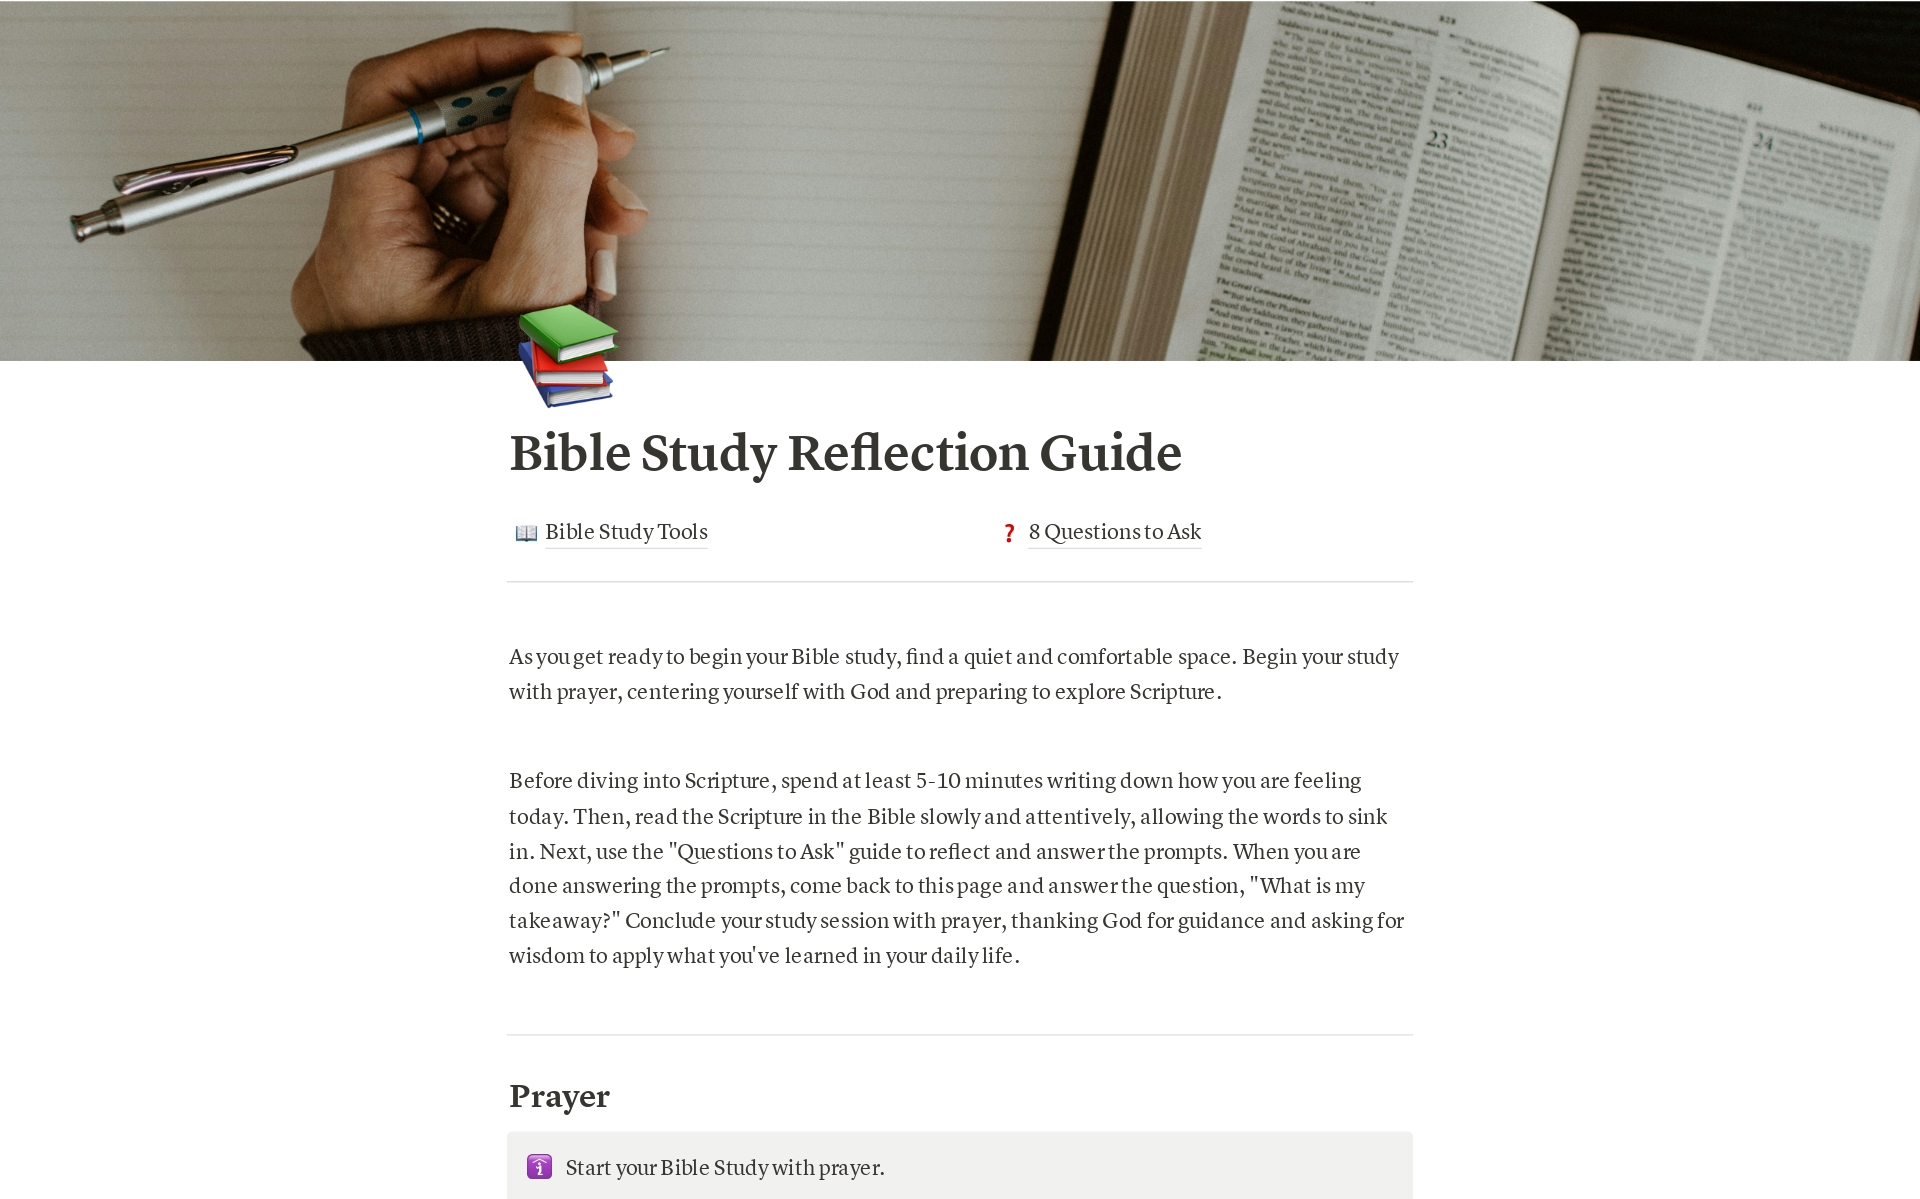 Use this guide to help you reflect when you are reading Scripture.